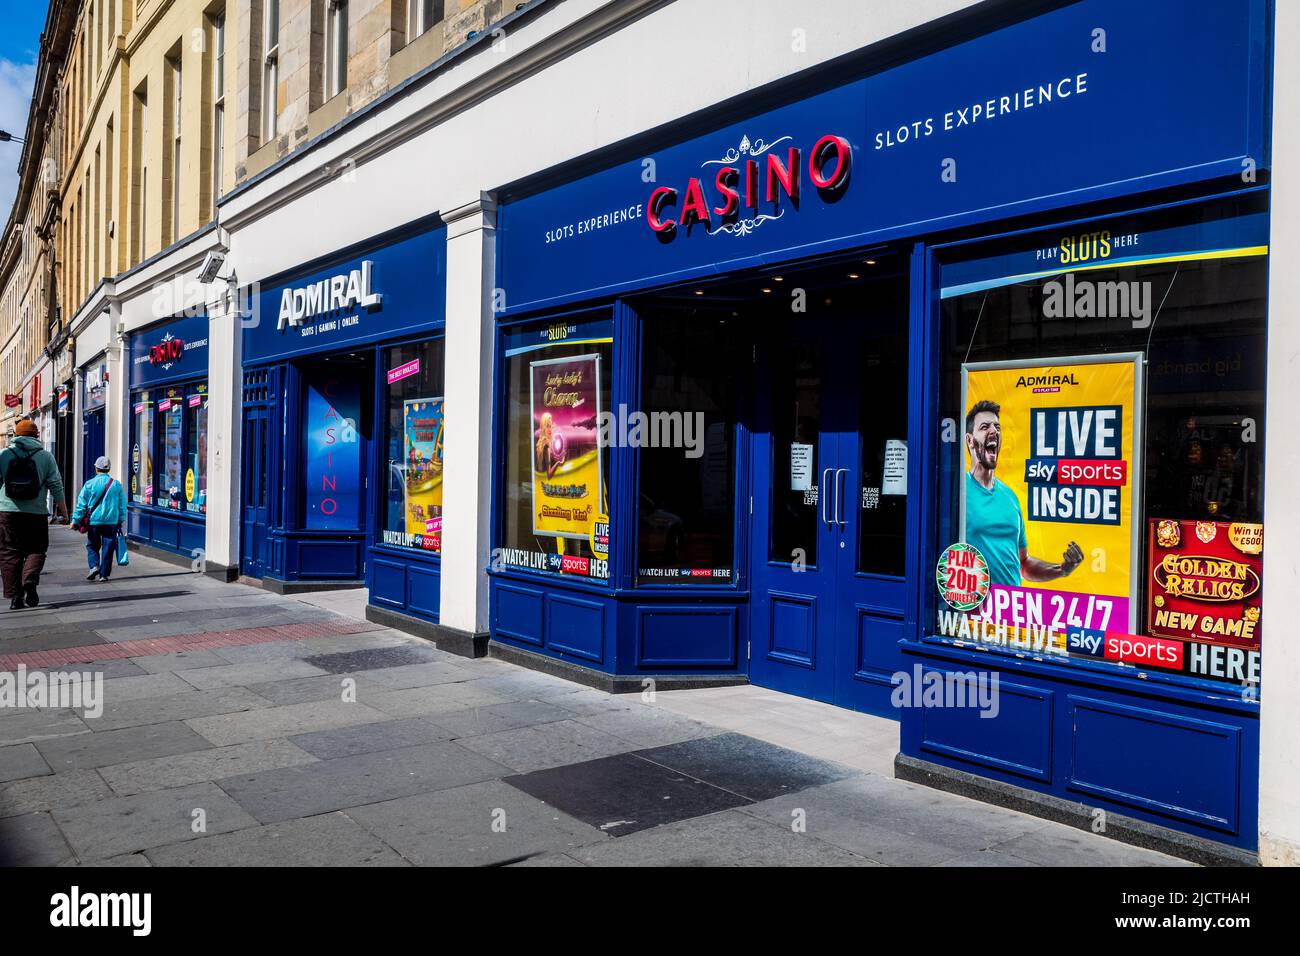 Admiral Casino gaming venue Newcastle UK, one of 230 high street & seaside venues owned by Luxury Leisure Talarius. High Street Slot Machines. Stock Photo